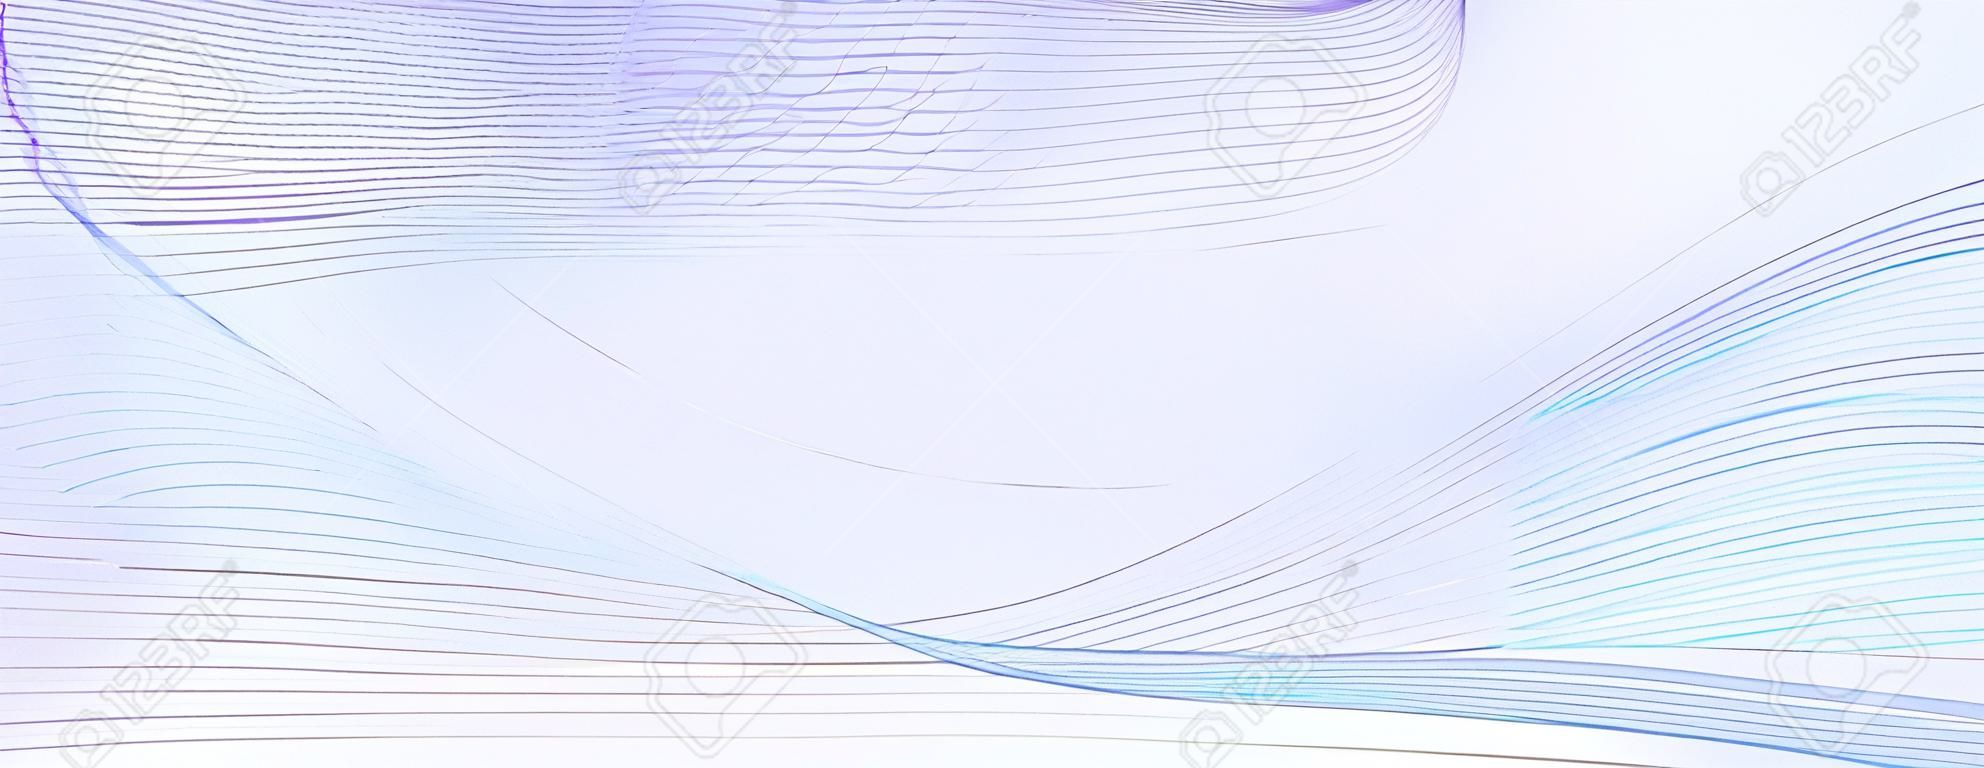 Light violet, blue tangled curves, net pattern. Vector colored watermark. Pastel squiggly lines. Technology background. Abstract guilloche design for voucher, flyer, check, certificate, landing page, banner. illustration